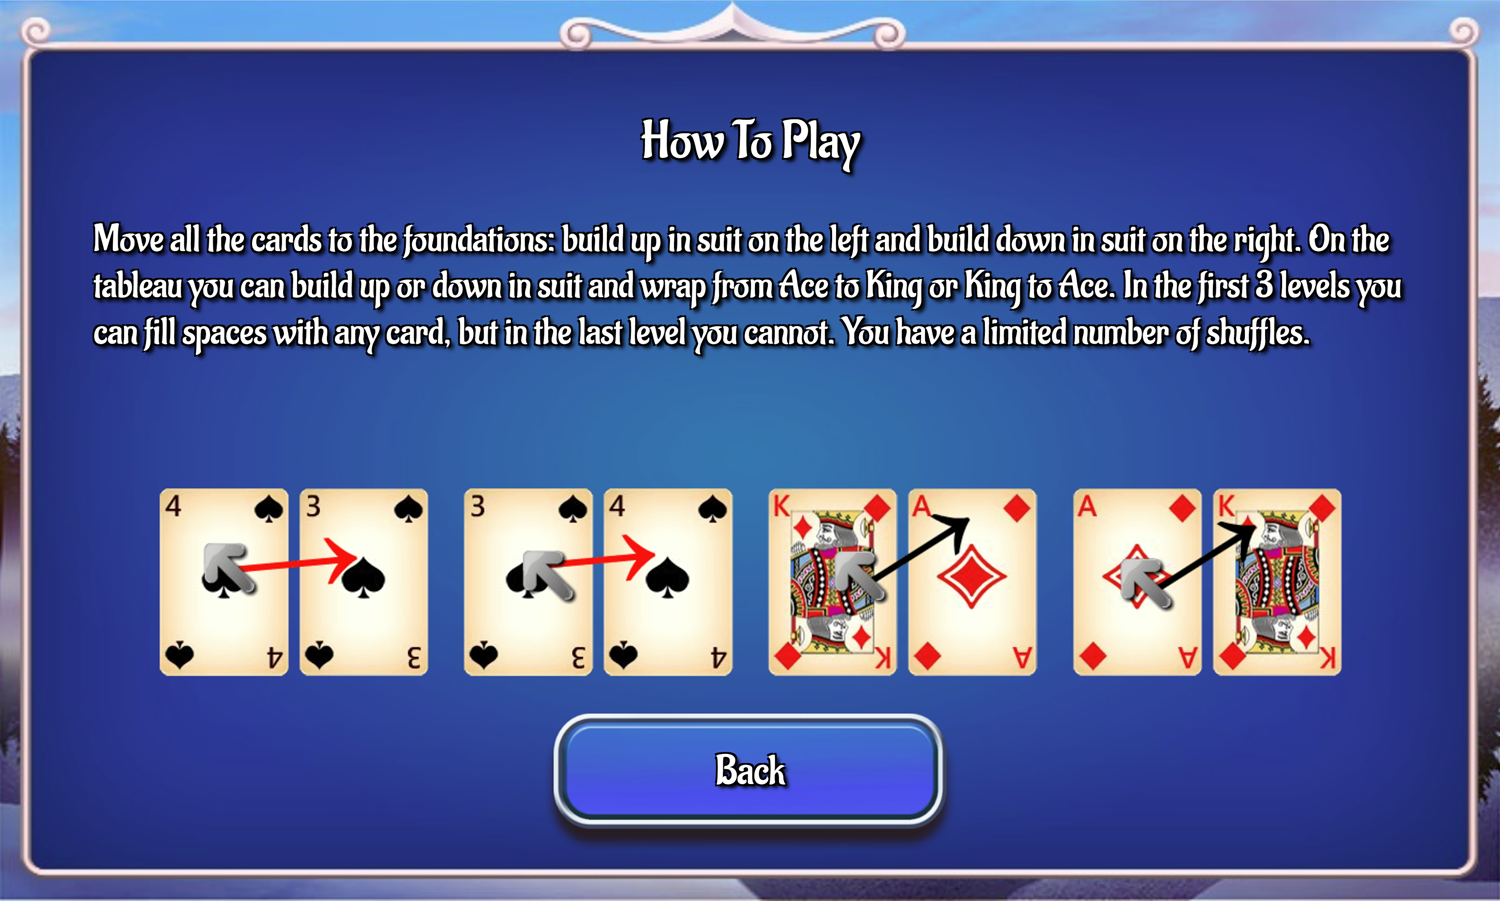 Crescent Solitaire Game How to Play Screen Screenshot.